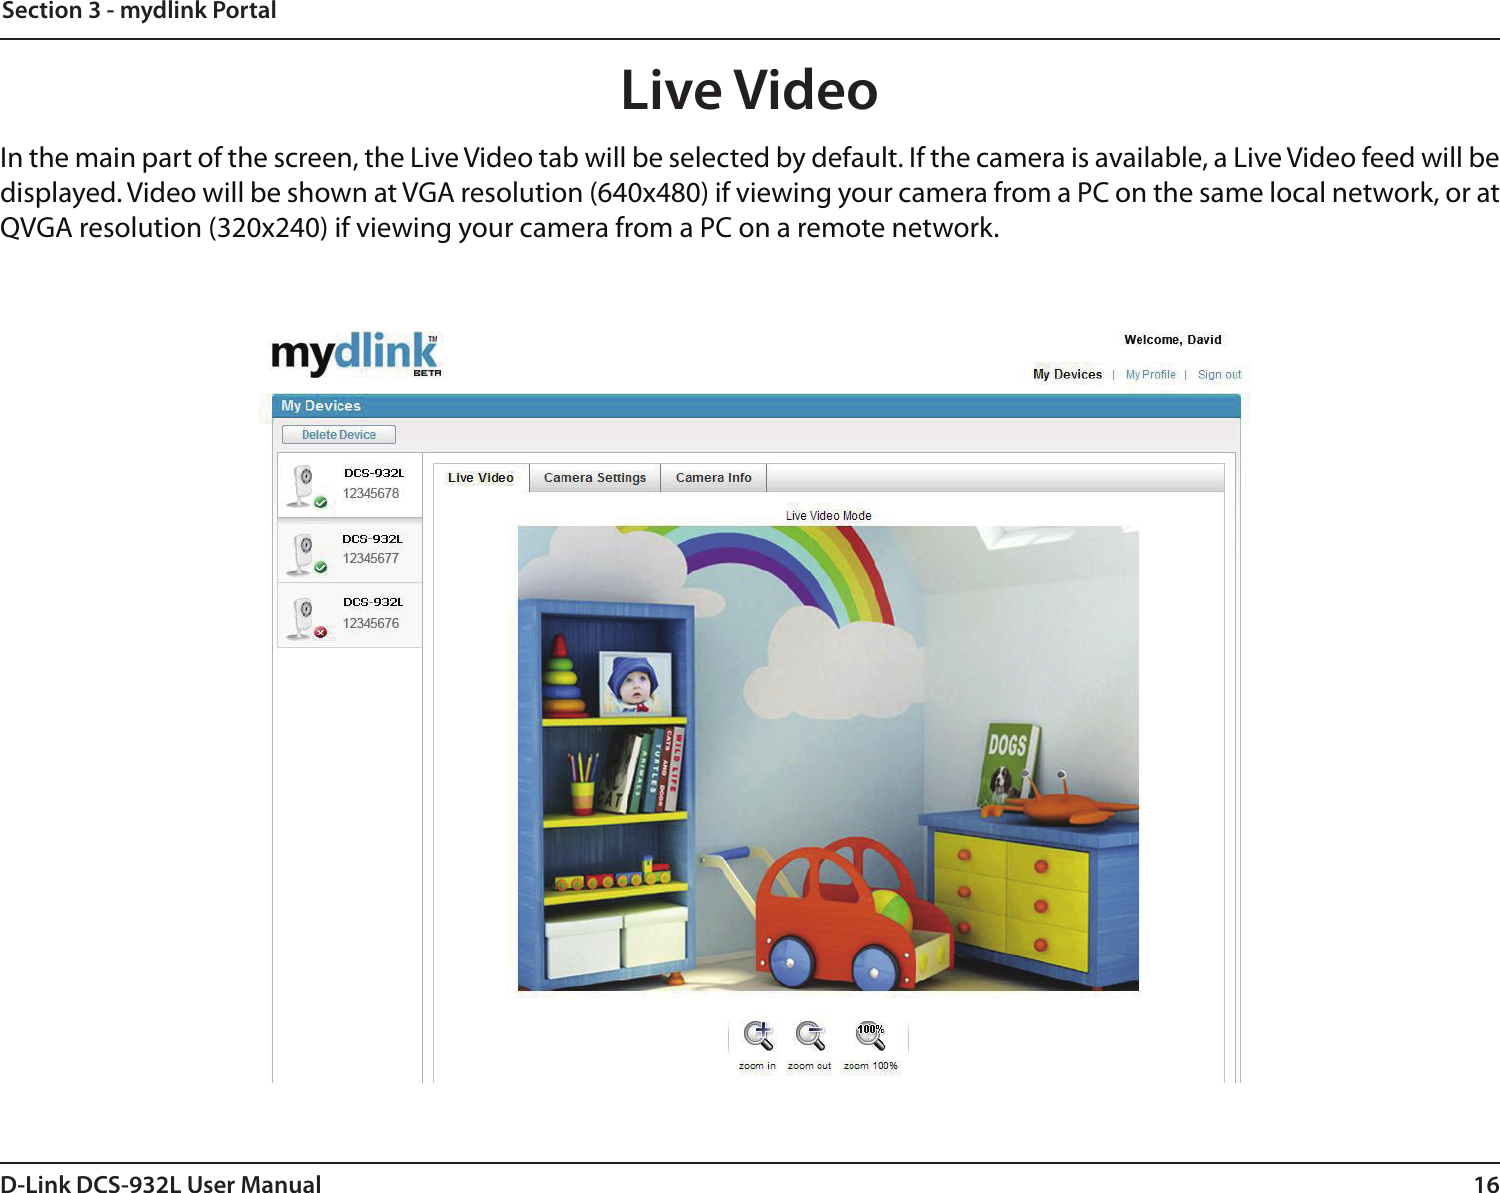 16D-Link DCS-932L User ManualSection 3 - mydlink PortalLive VideoIn the main part of the screen, the Live Video tab will be selected by default. If the camera is available, a Live Video feed will be displayed. Video will be shown at VGA resolution (640x480) if viewing your camera from a PC on the same local network, or at QVGA resolution (320x240) if viewing your camera from a PC on a remote network.